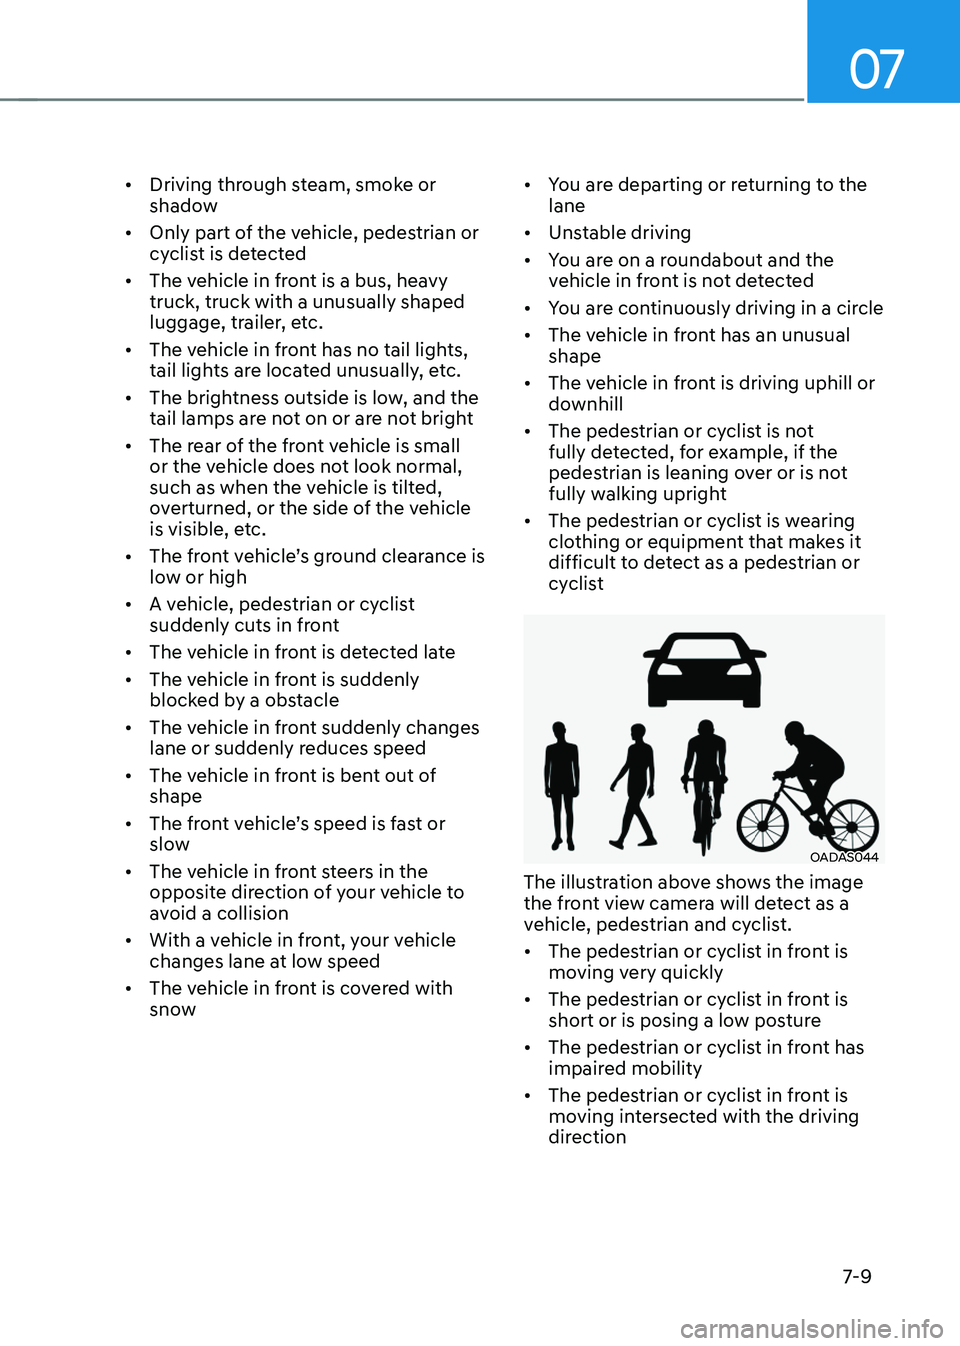 HYUNDAI TUCSON 2023  Owners Manual 07
7-9
•	Driving through steam, smoke or 
shadow
•	 Only part of the vehicle, pedestrian or 
cyclist is detected
•	 The vehicle in front is a bus, heavy 
truck, truck with a unusually shaped 
lu